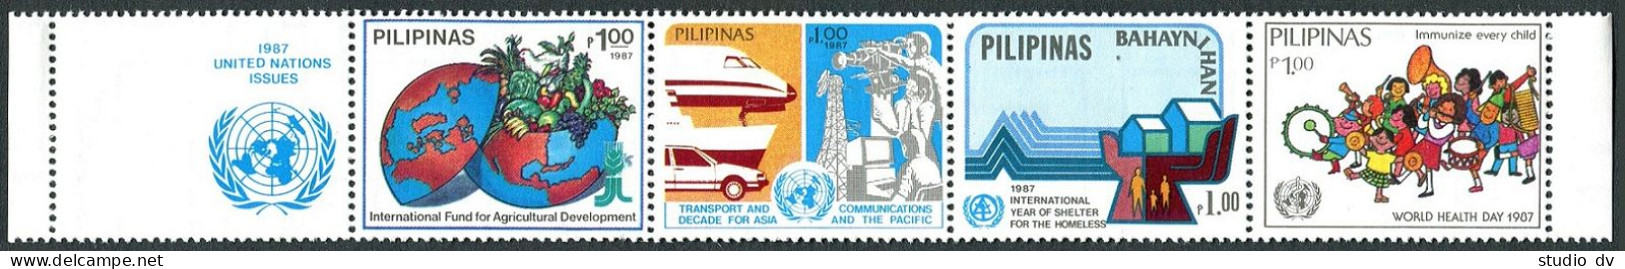 Philippines 1907 Ad Perf & Imperf  Strips, MNH. UN Projects 1987. FAO, IYSH-1987 - Filipinas